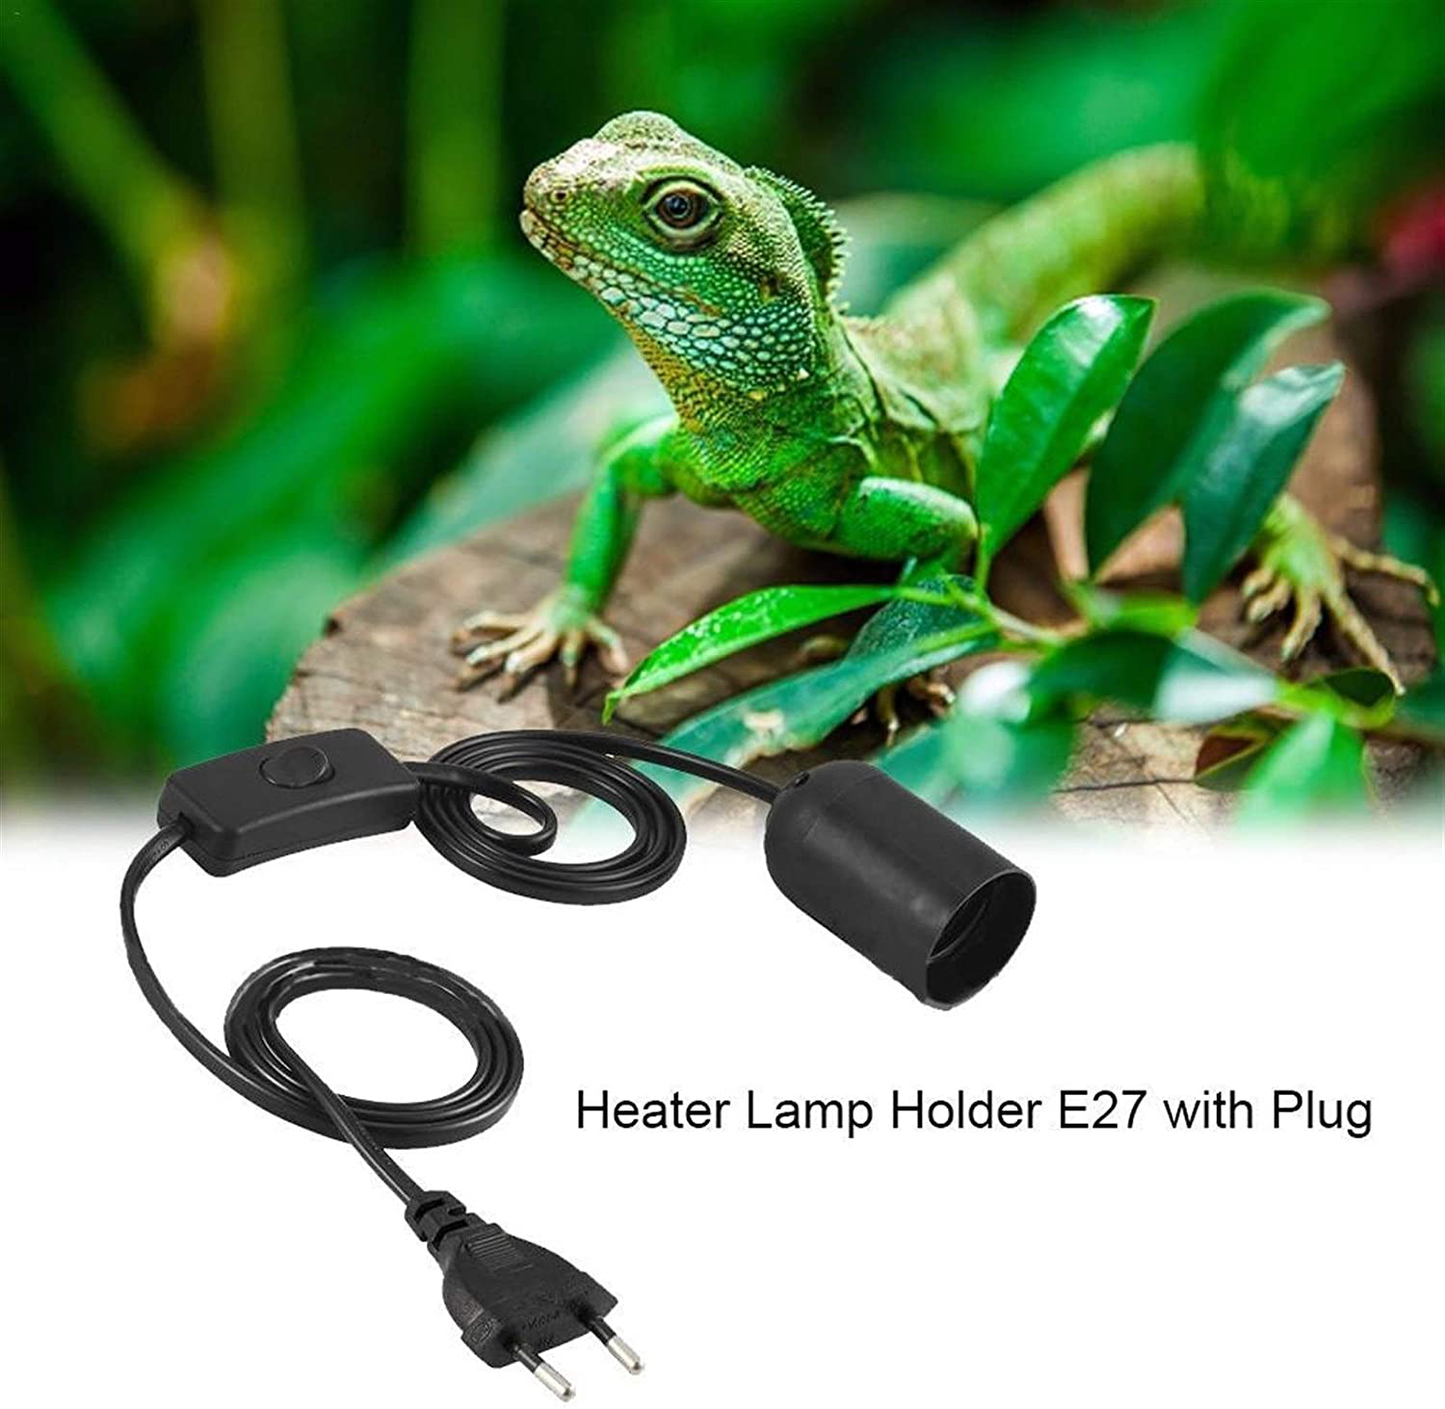 MING-BIN Pet Heating Heating Lamp Lamp Holder Switch Plug Reptile Chicken and Duck Heating Lamp Holder EU Animal Warm Keeping Lamp Holder